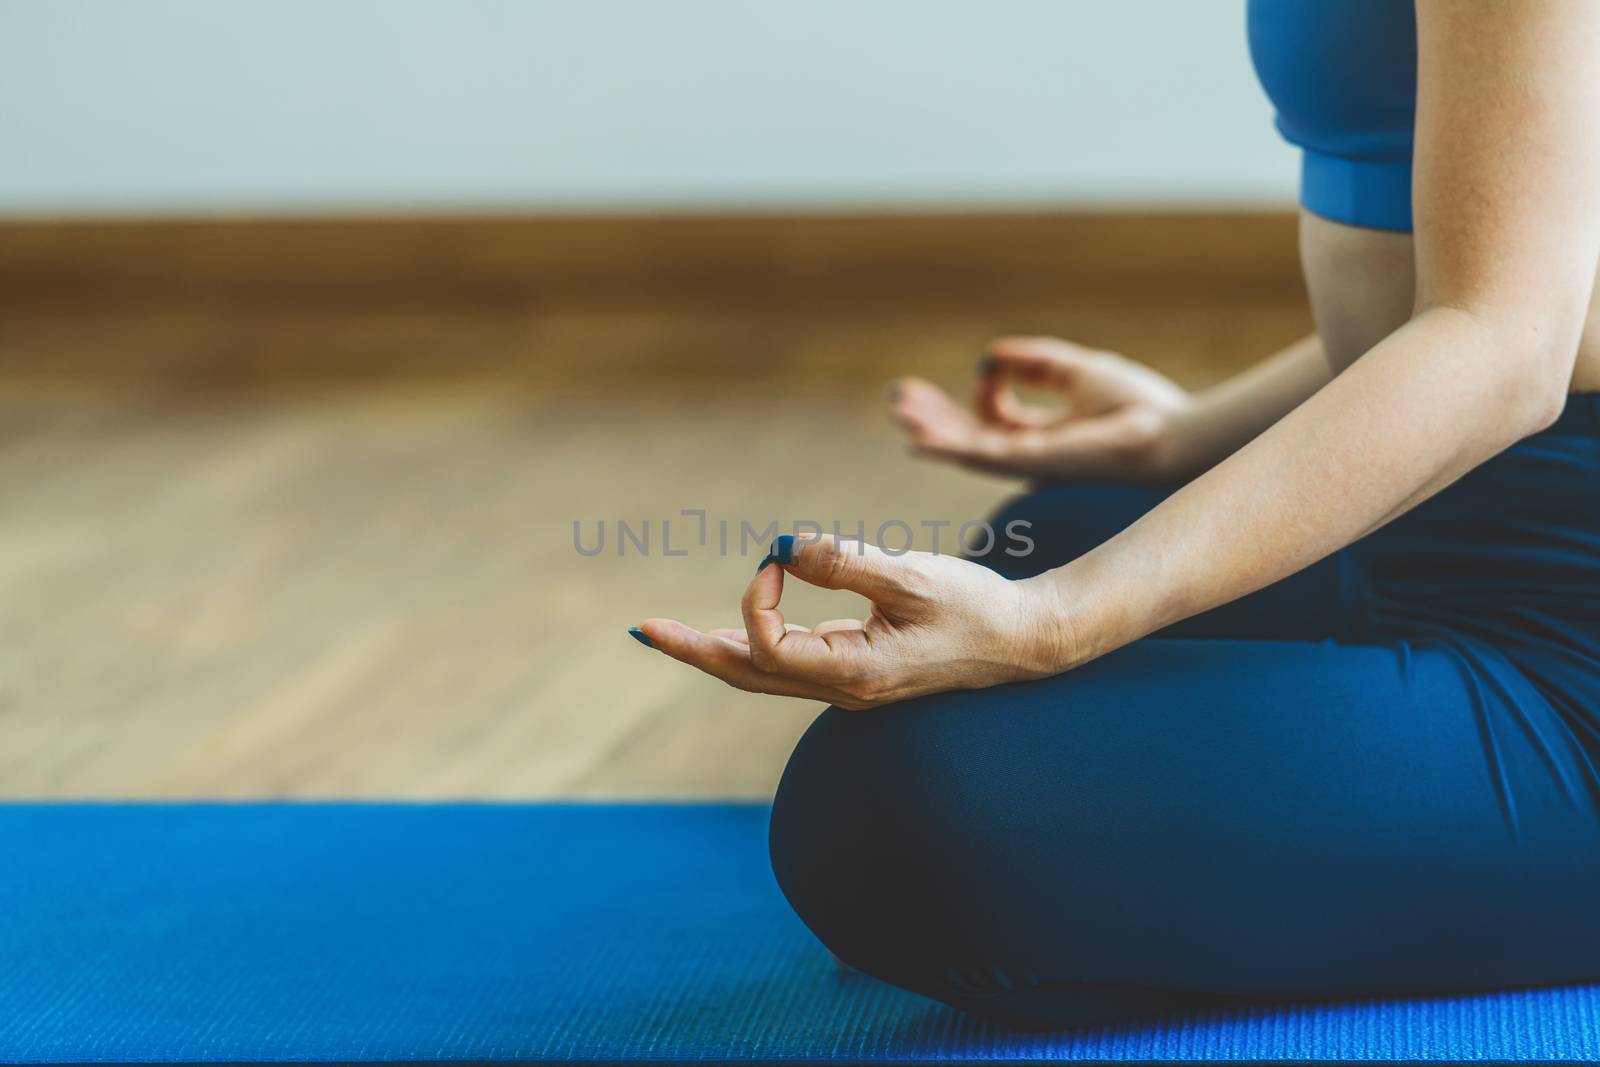 Asian woman practicing yoga from home when Covid19 outbreak and lockdown, healthy or Meditation Exercise, yoga workout at home, coronavirus pandemic and quarantine, sports and healthcare concept